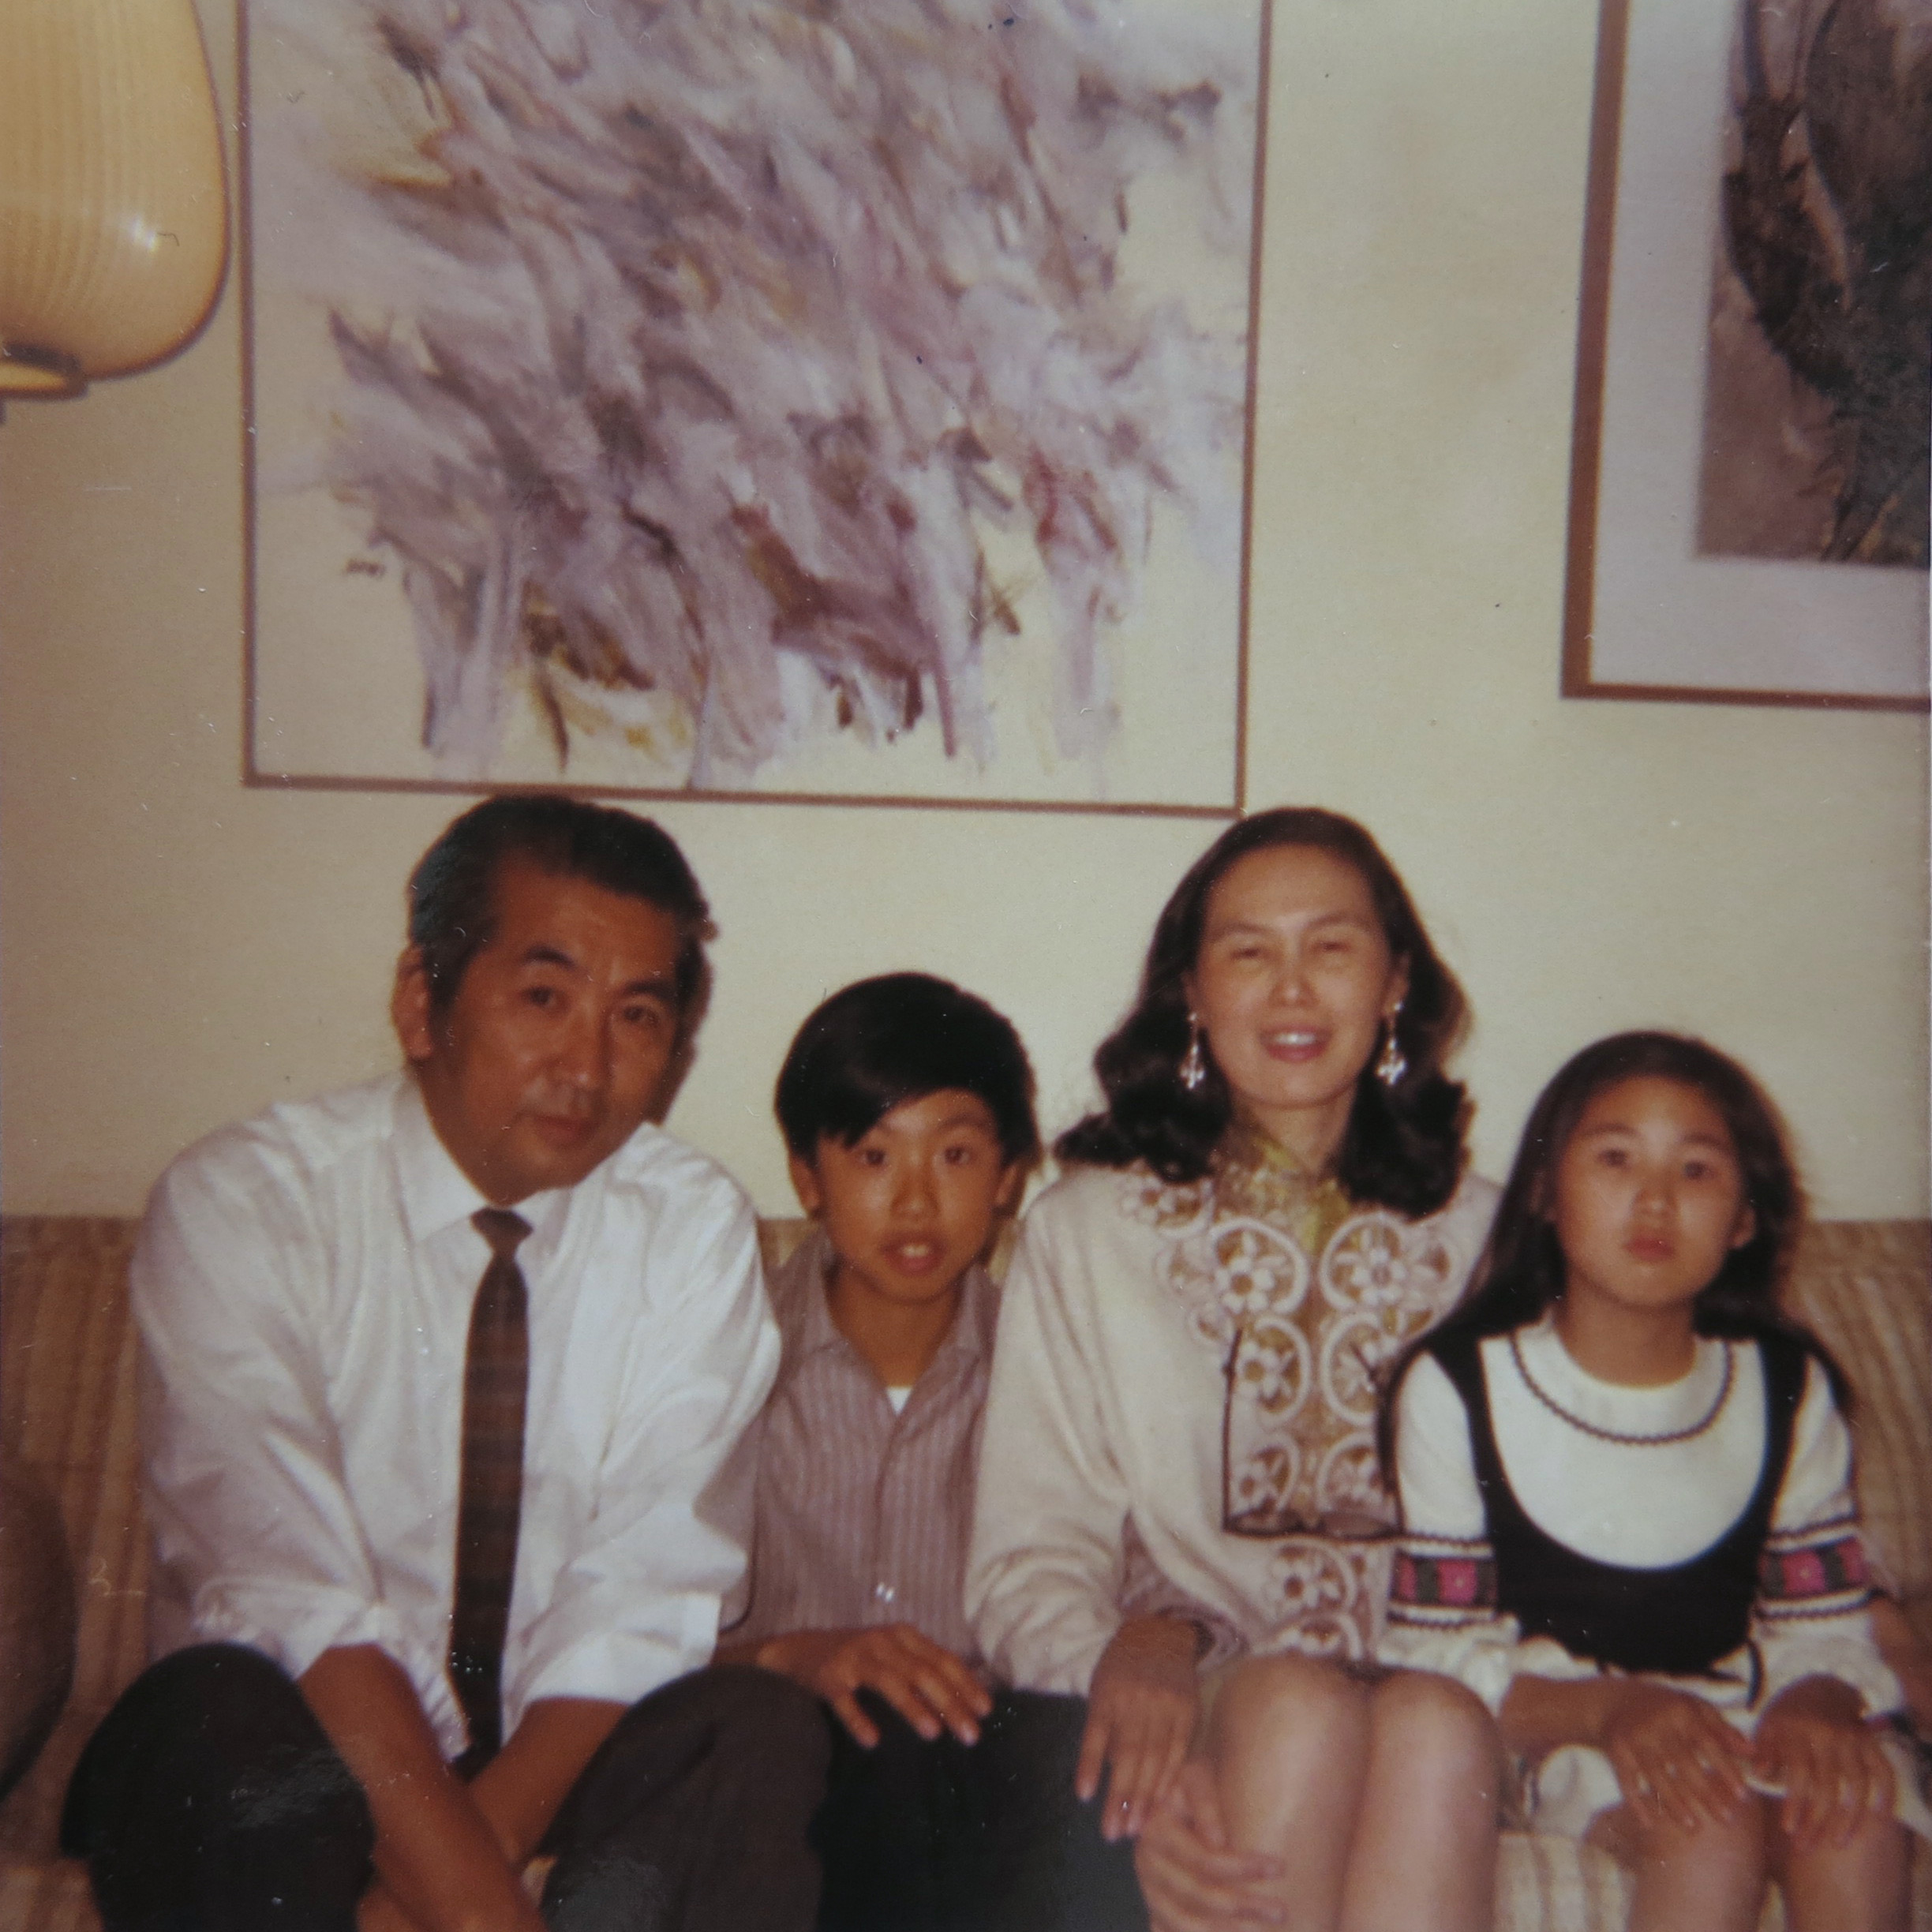 The Lin parents fled China as Mao came to power, then became college professors in Ohio. The Lin siblings recall growing up with few rules, but lots of freedom to write and create art.